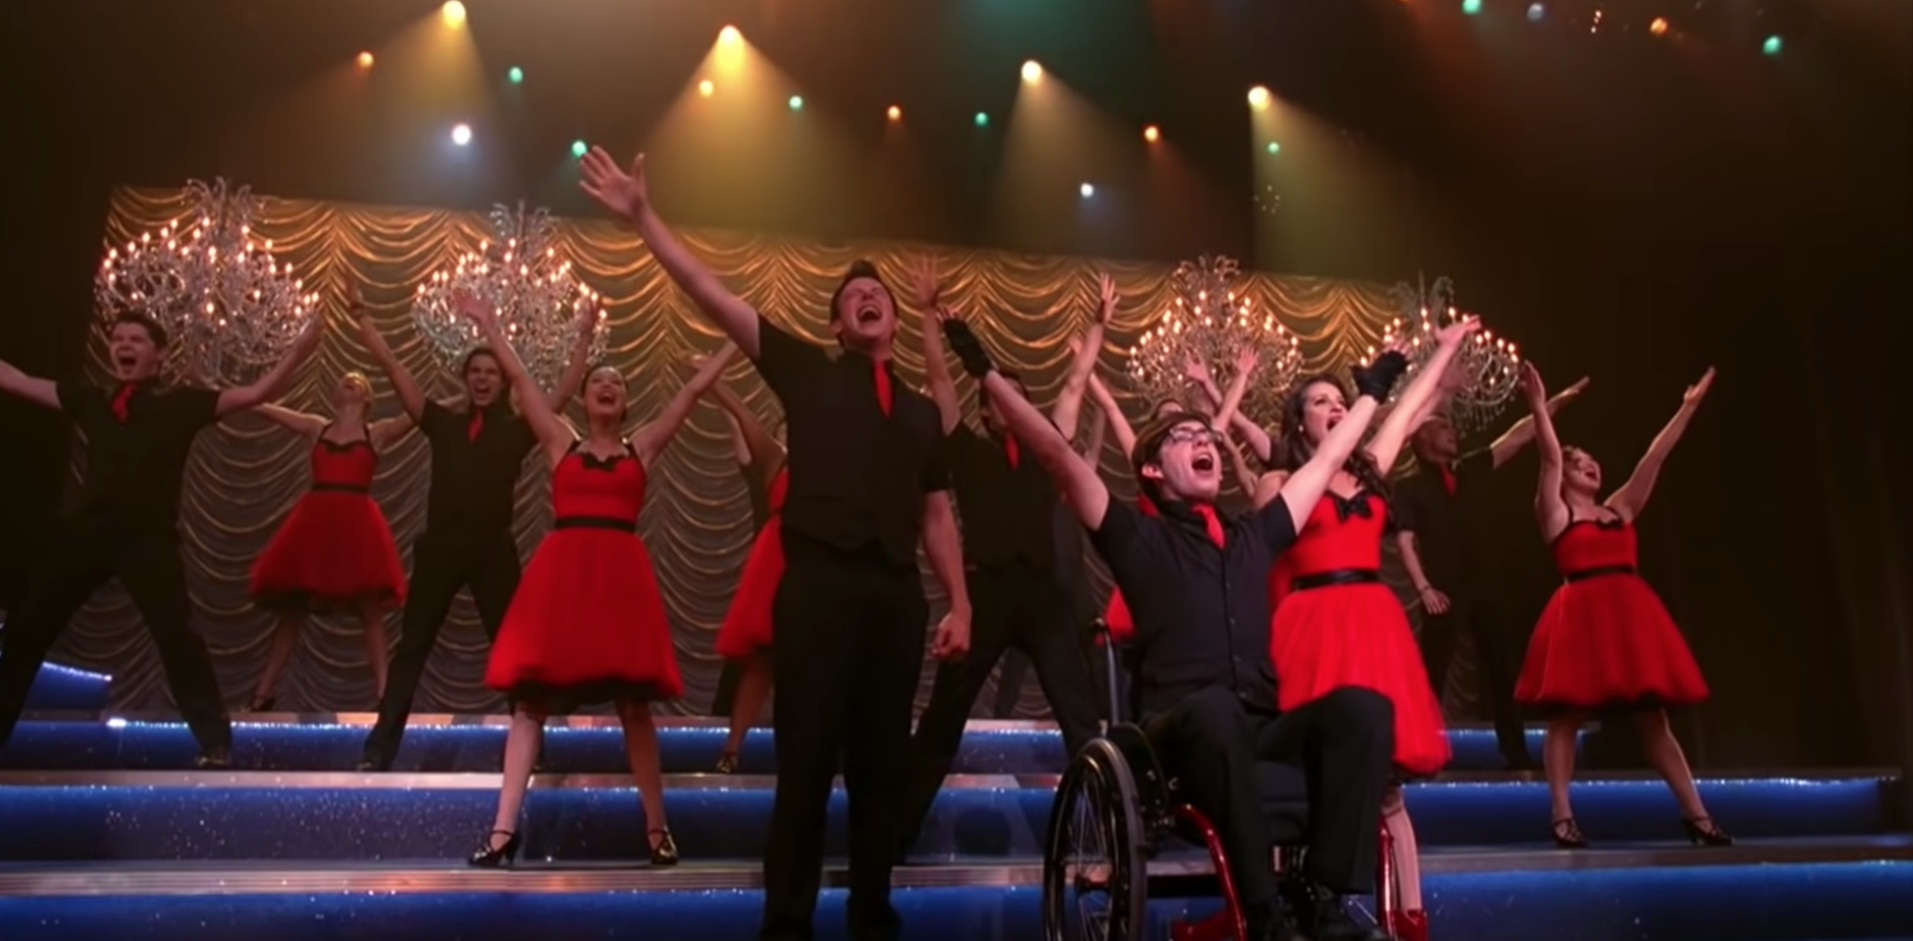 The Glee club performs on stage as the girls wear brightly colored dresses and the guys wear dark button up shirts with brightly colored ties